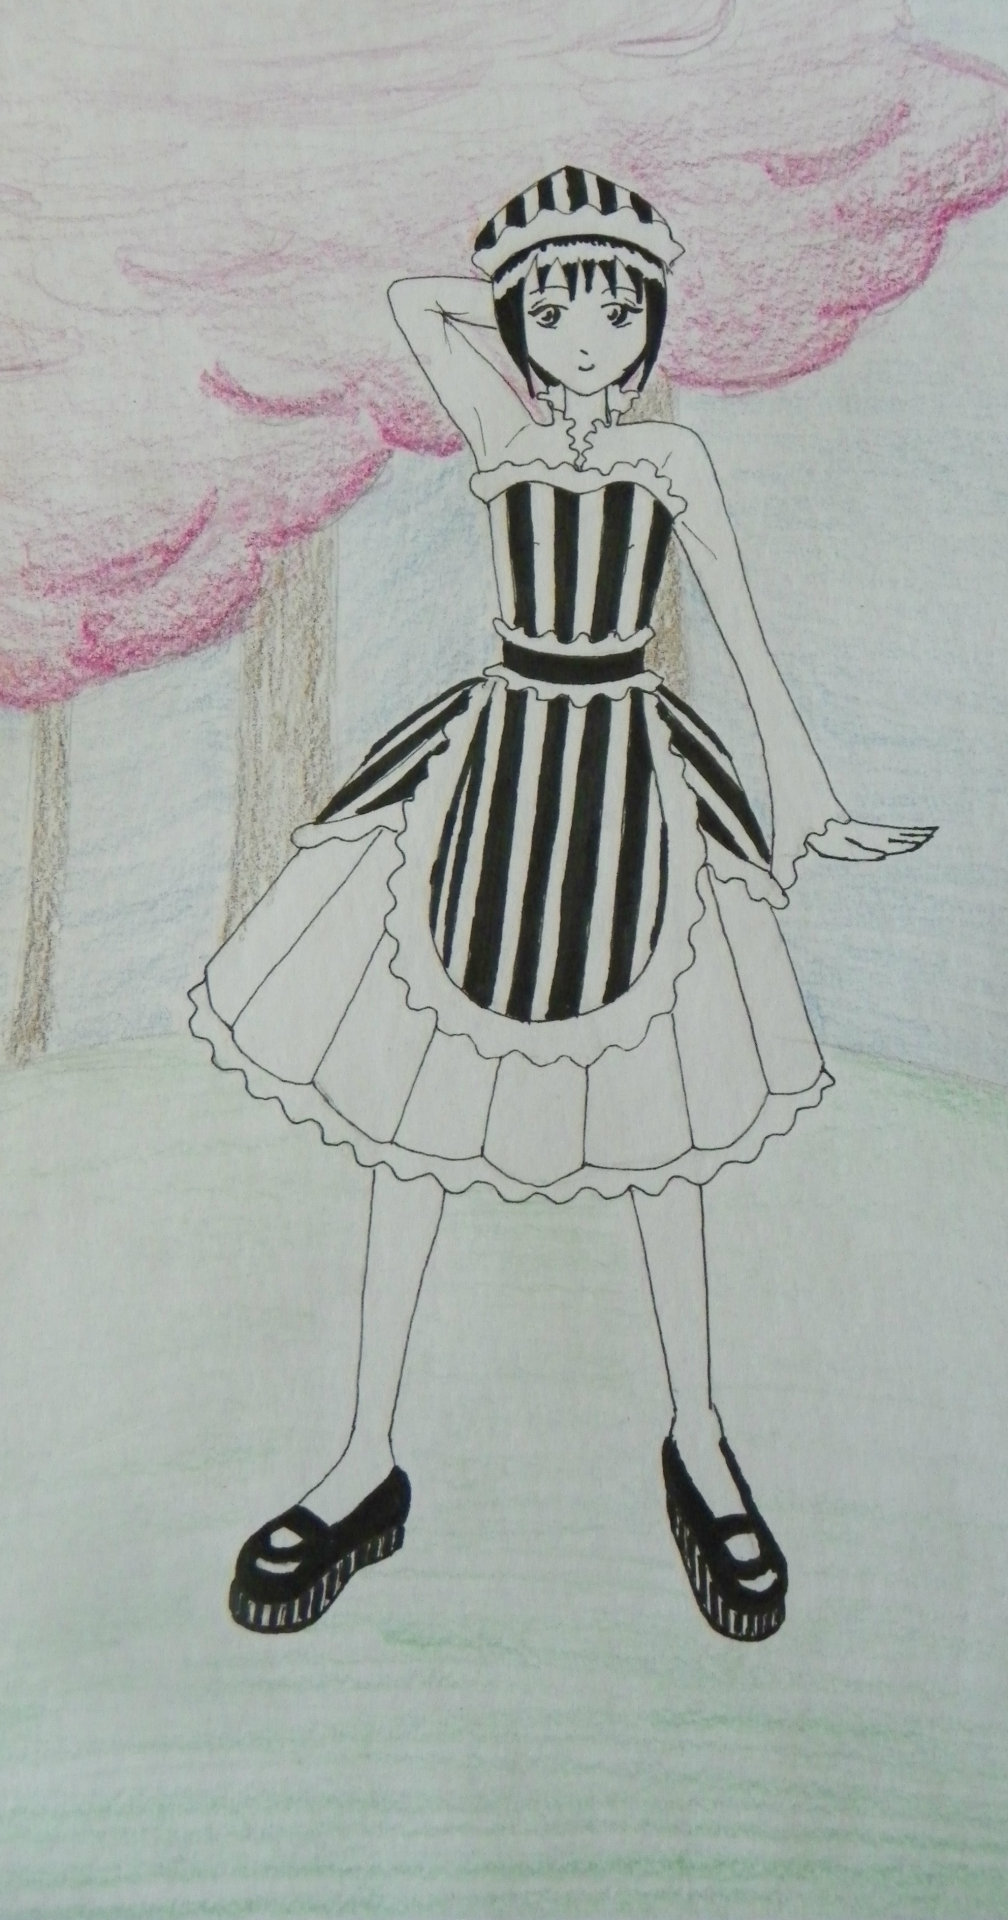 I was going for a black and white maid-esque lolita :3 the background was kind of